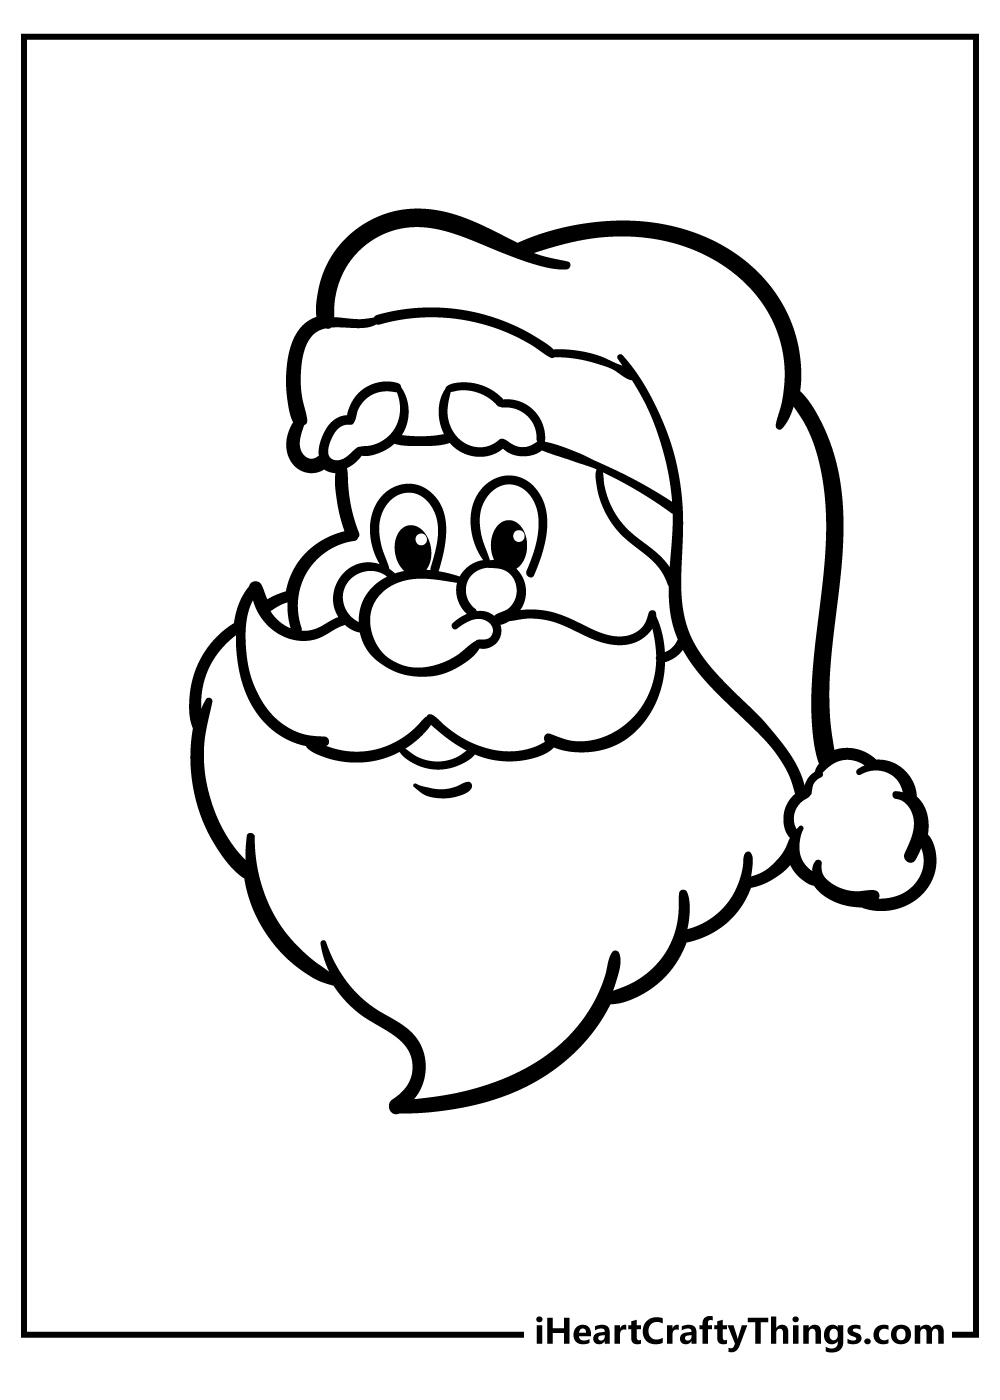 Cute Santa Christmas Coloring Book for adults free download